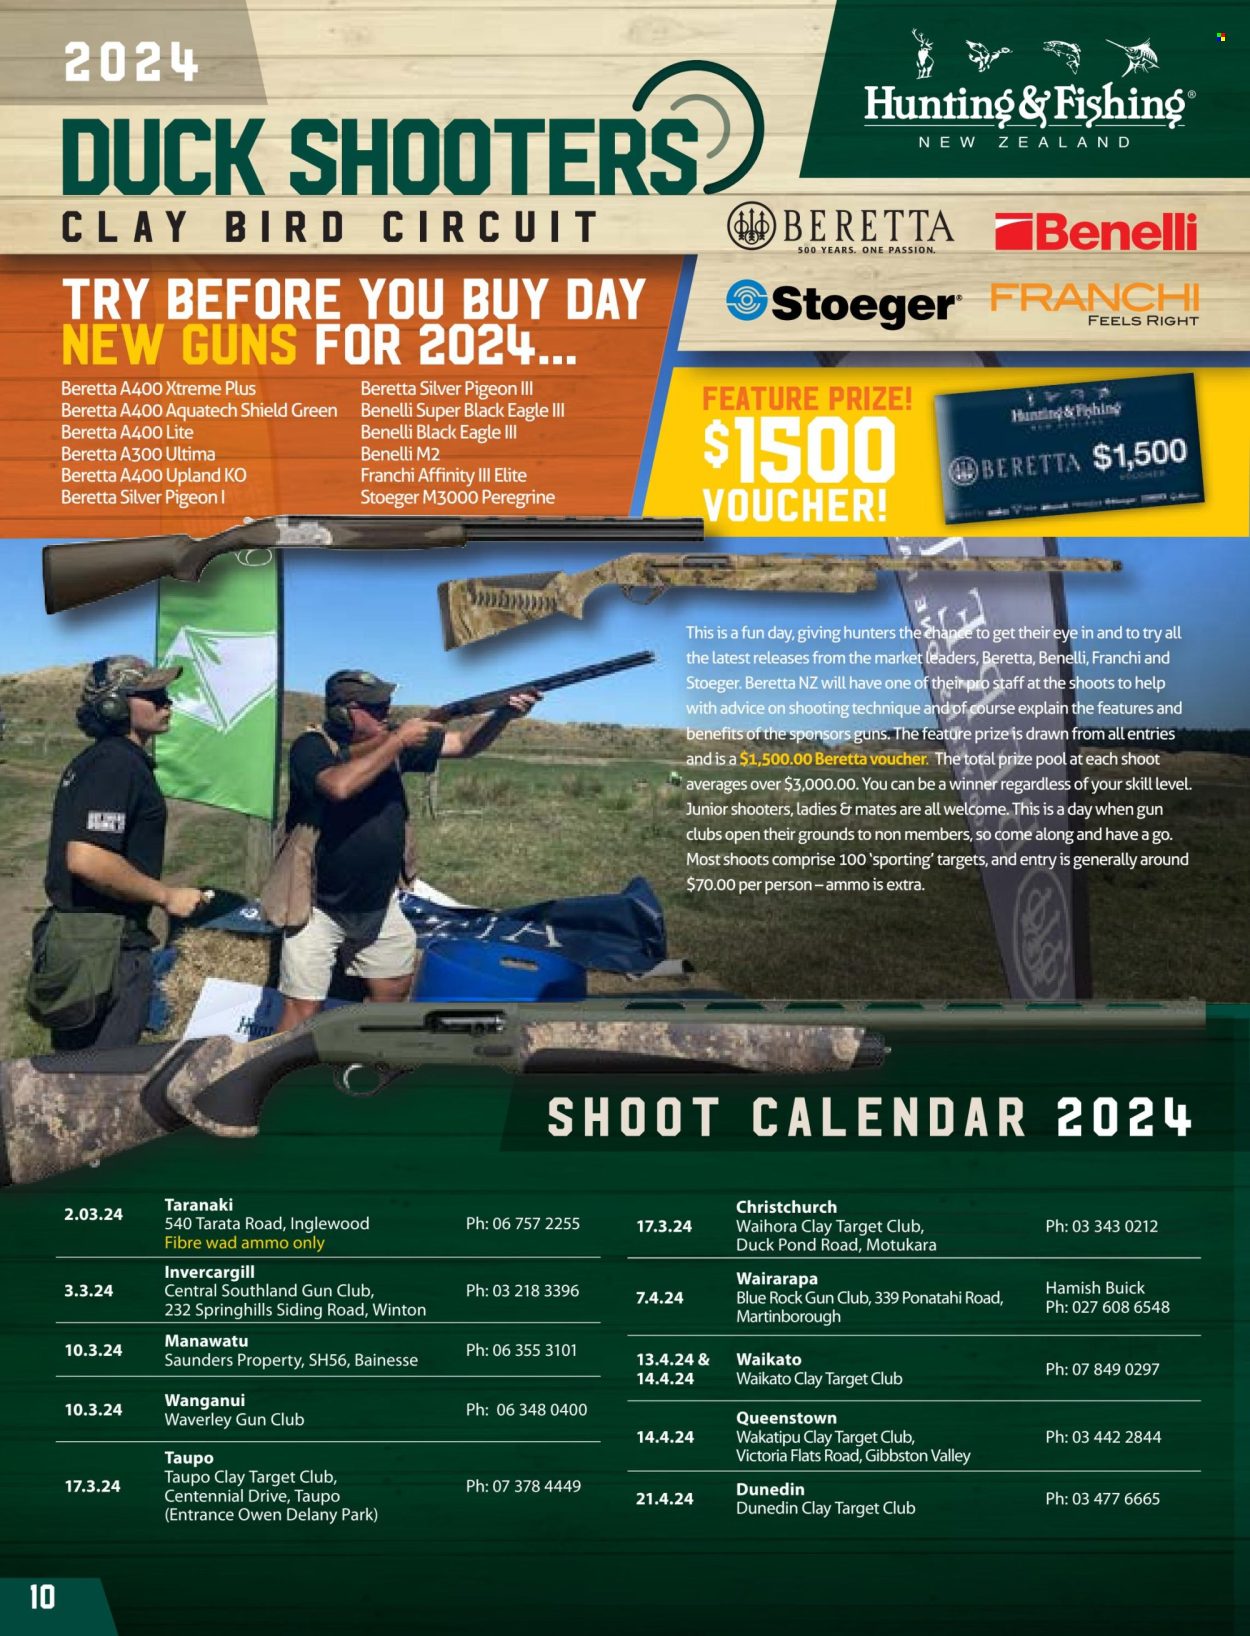 thumbnail - Hunting & Fishing mailer - Sales products - Pigeon, gun, Stoeger, ammo. Page 10.